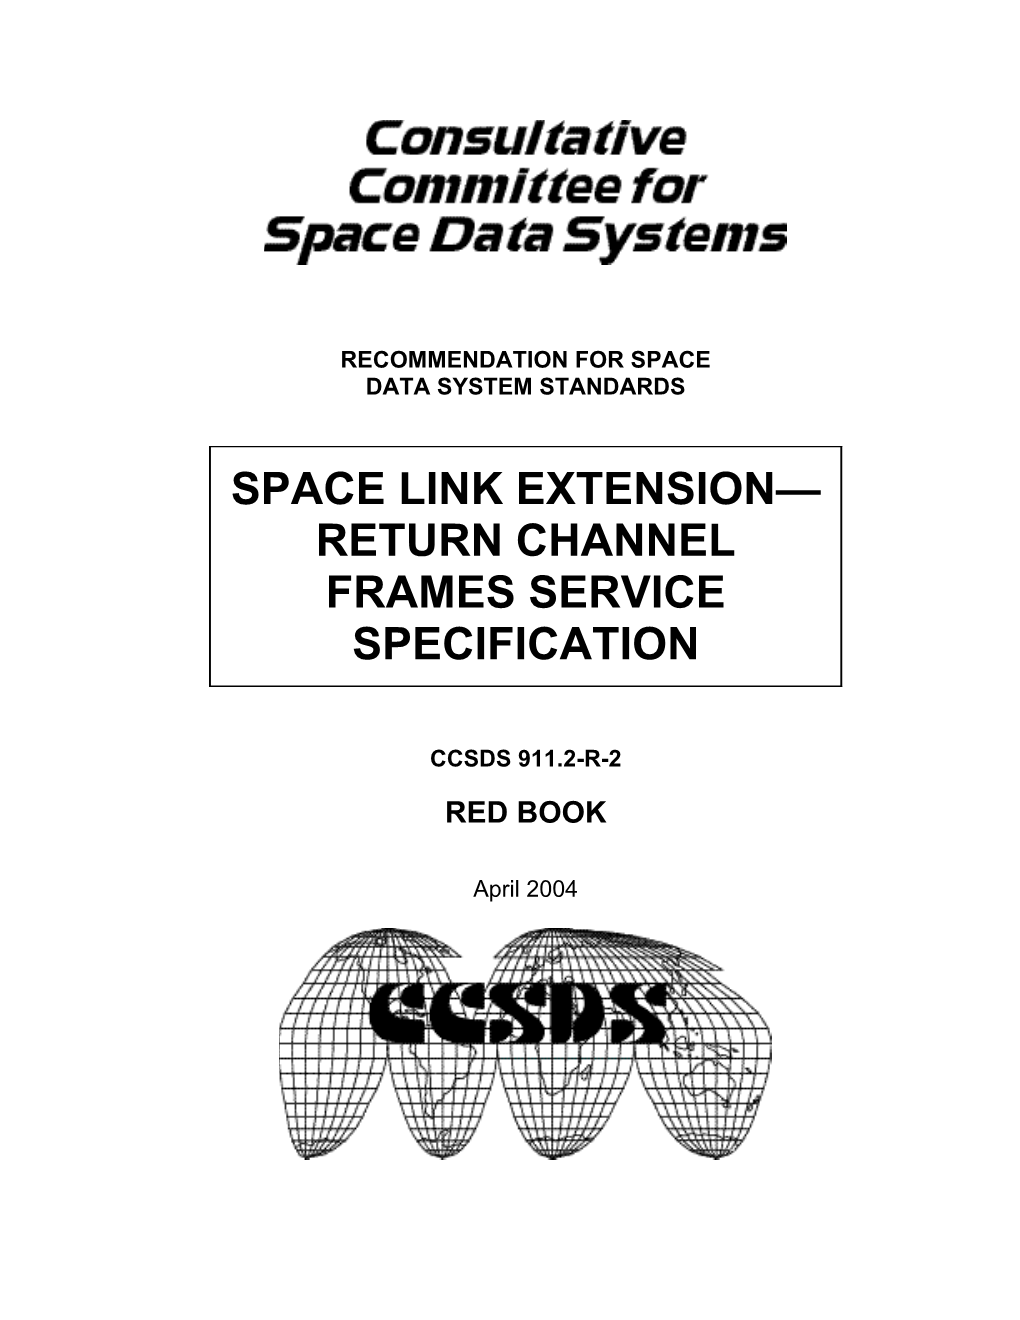 Space Link Extension Return Virtual Channel Frames Service Specification